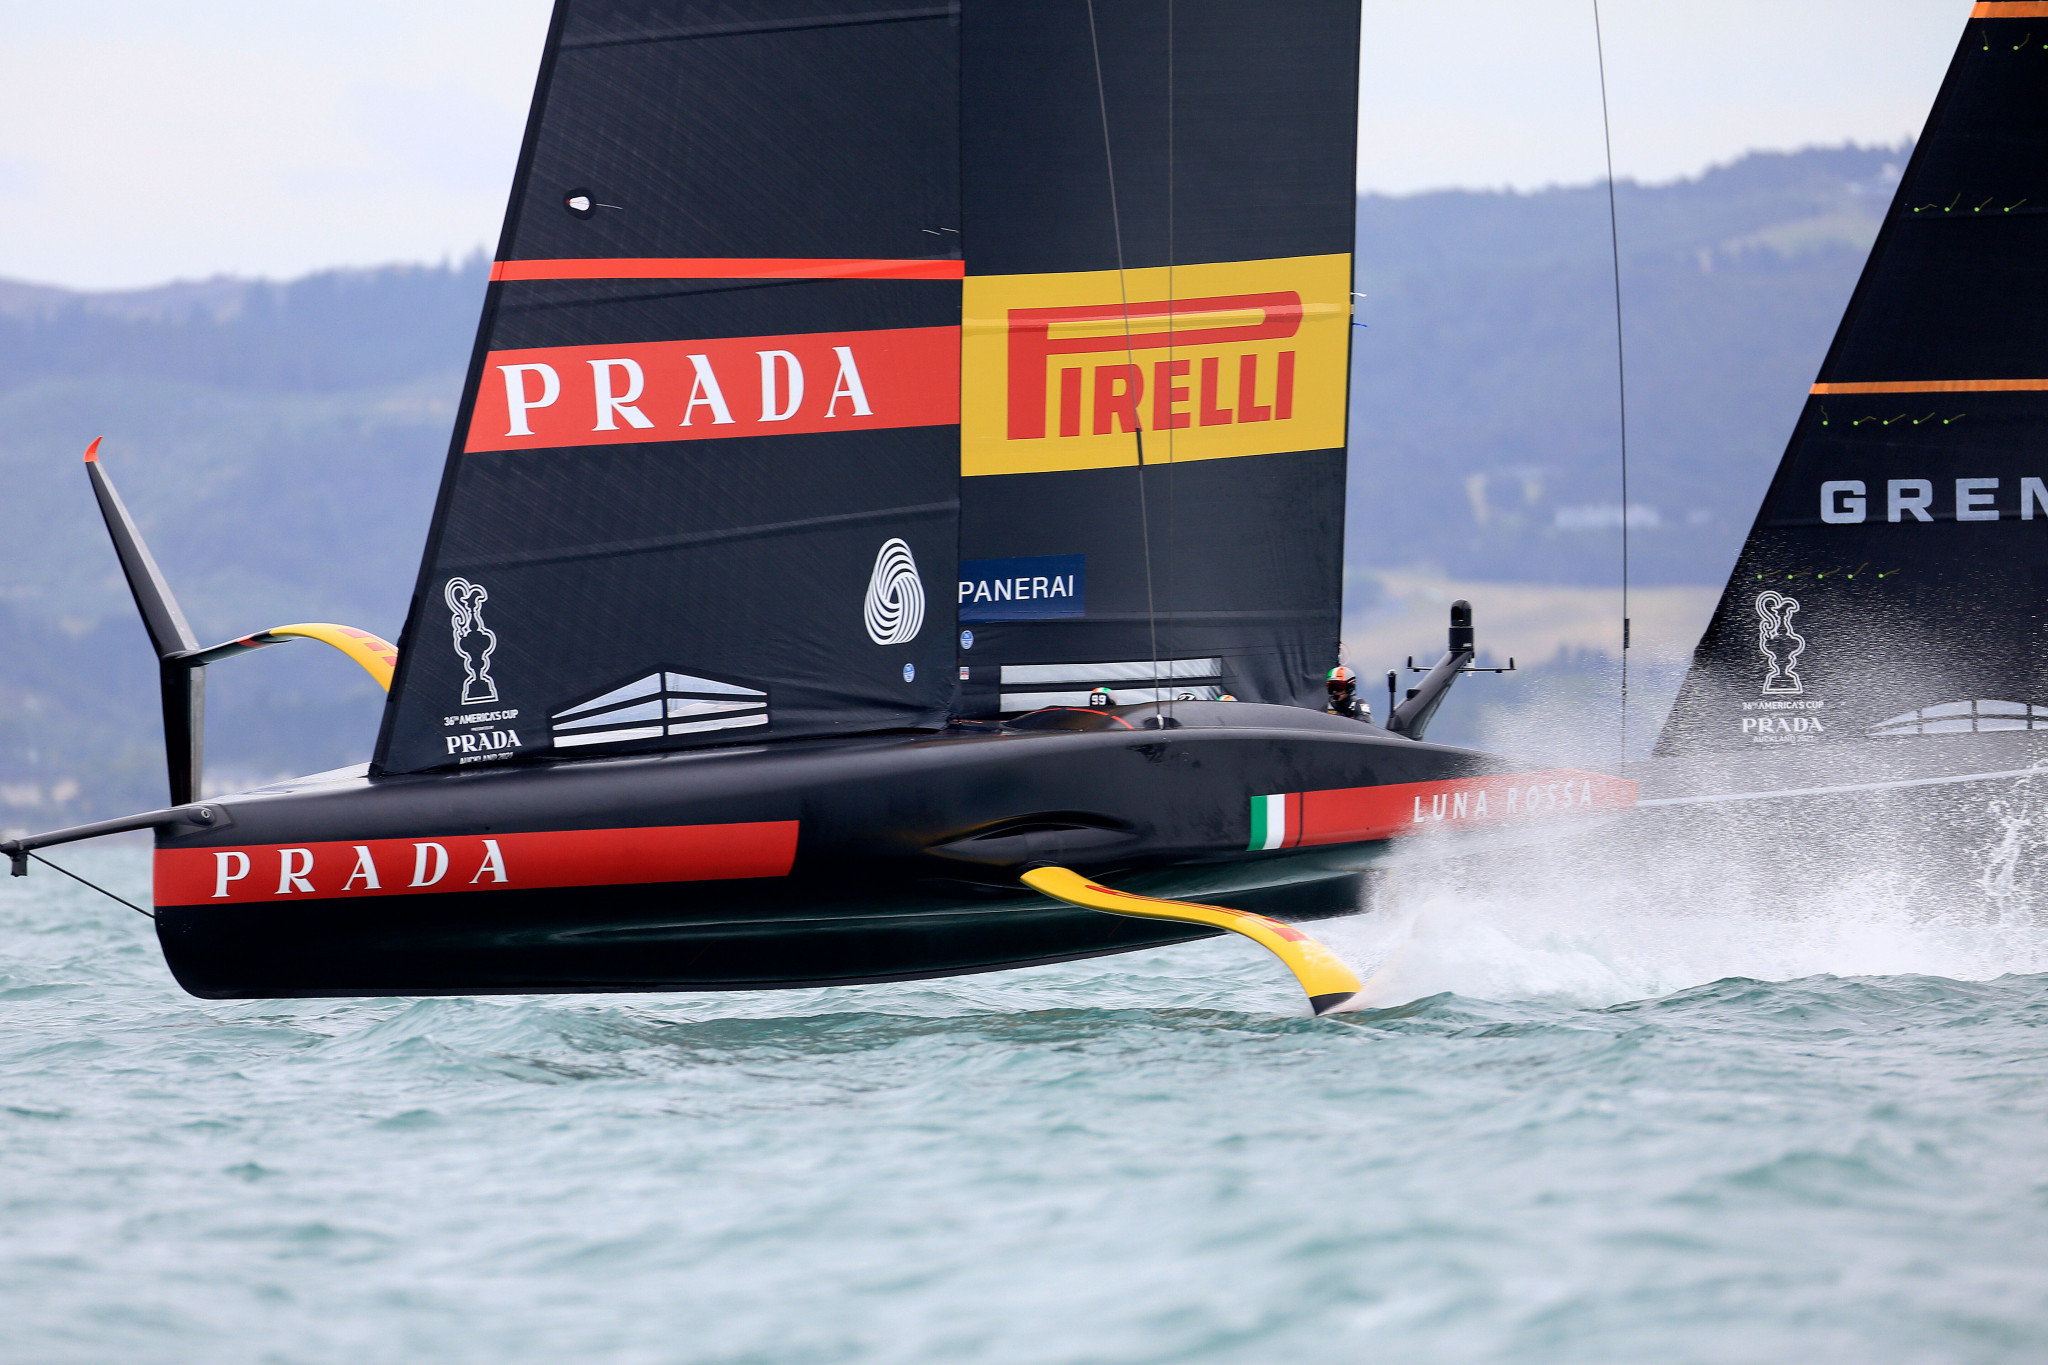 The next race of the Prada Cup has been postponed over a coronavirus outbreak ©Getty Images